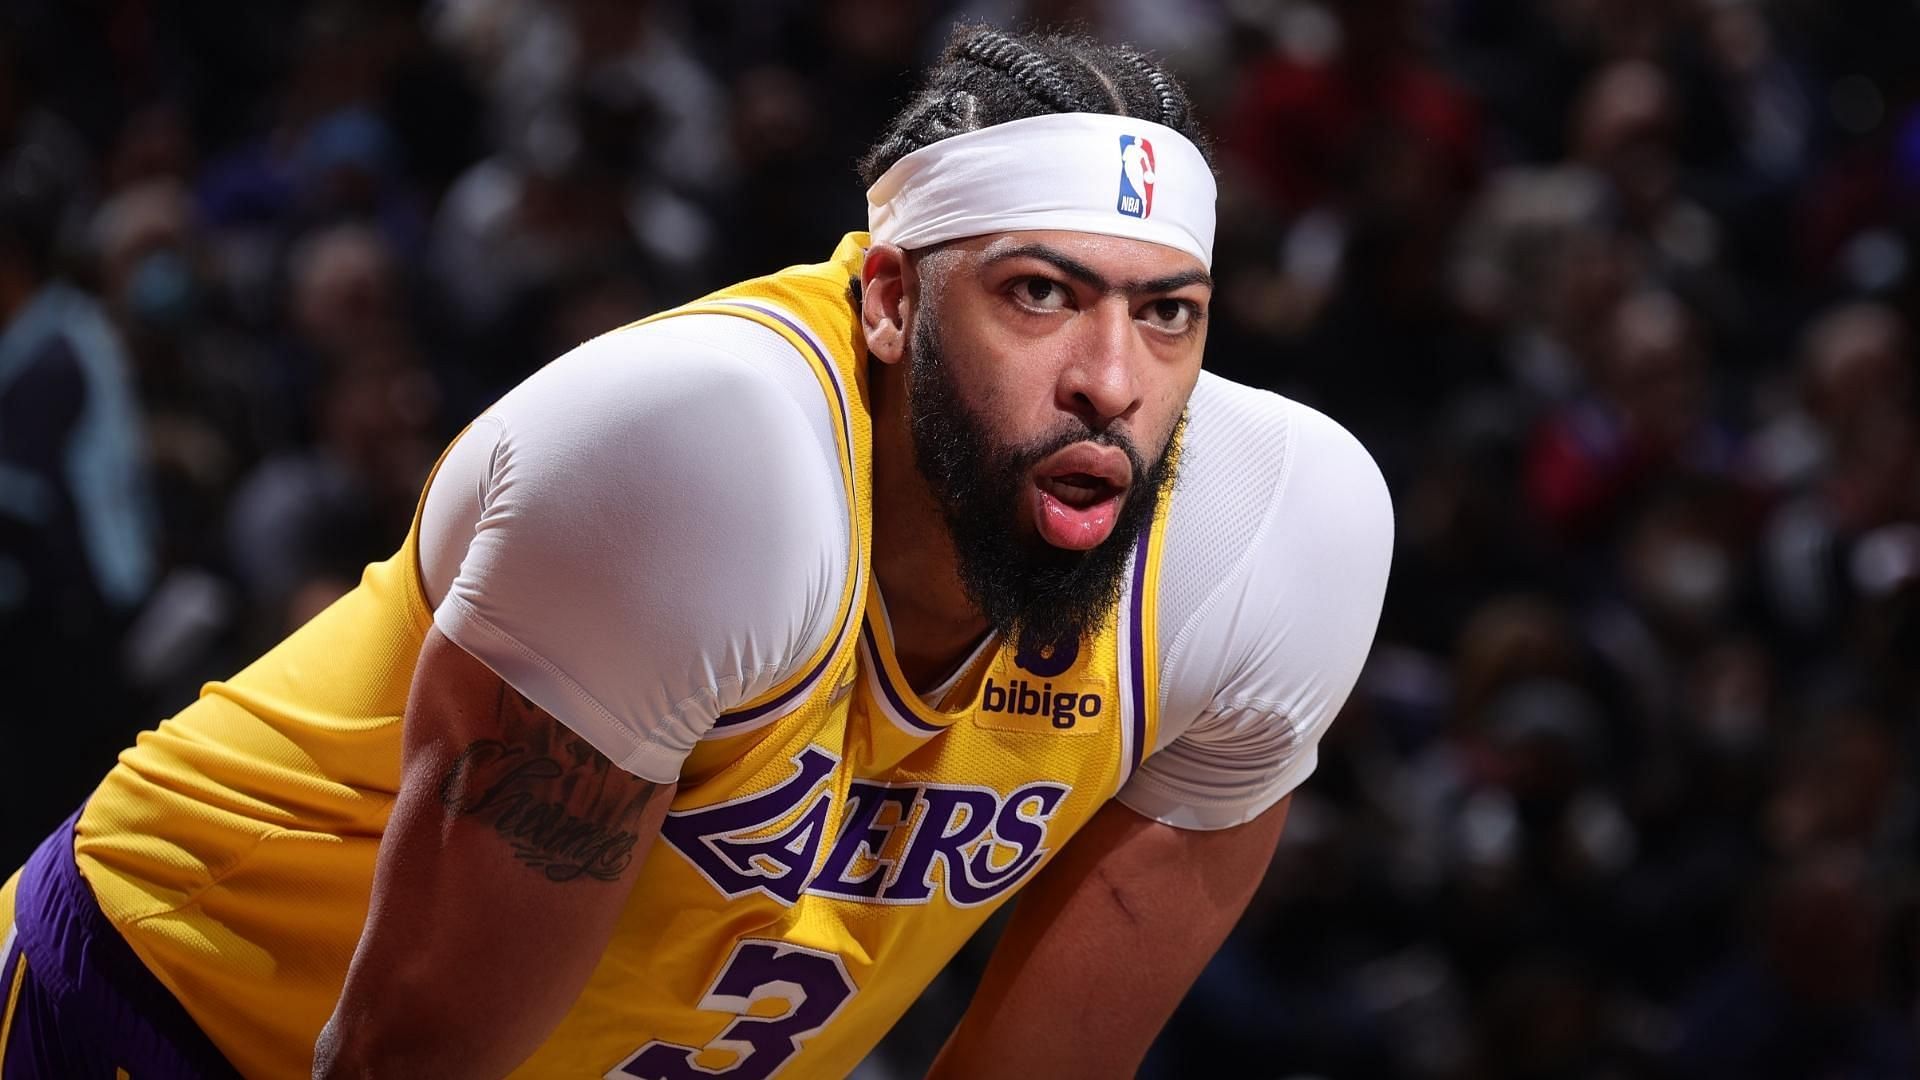 The LA Lakers will need an in-form Anthony Davis to have a chance of entering the playoffs next season. [Photo: Sporting News]